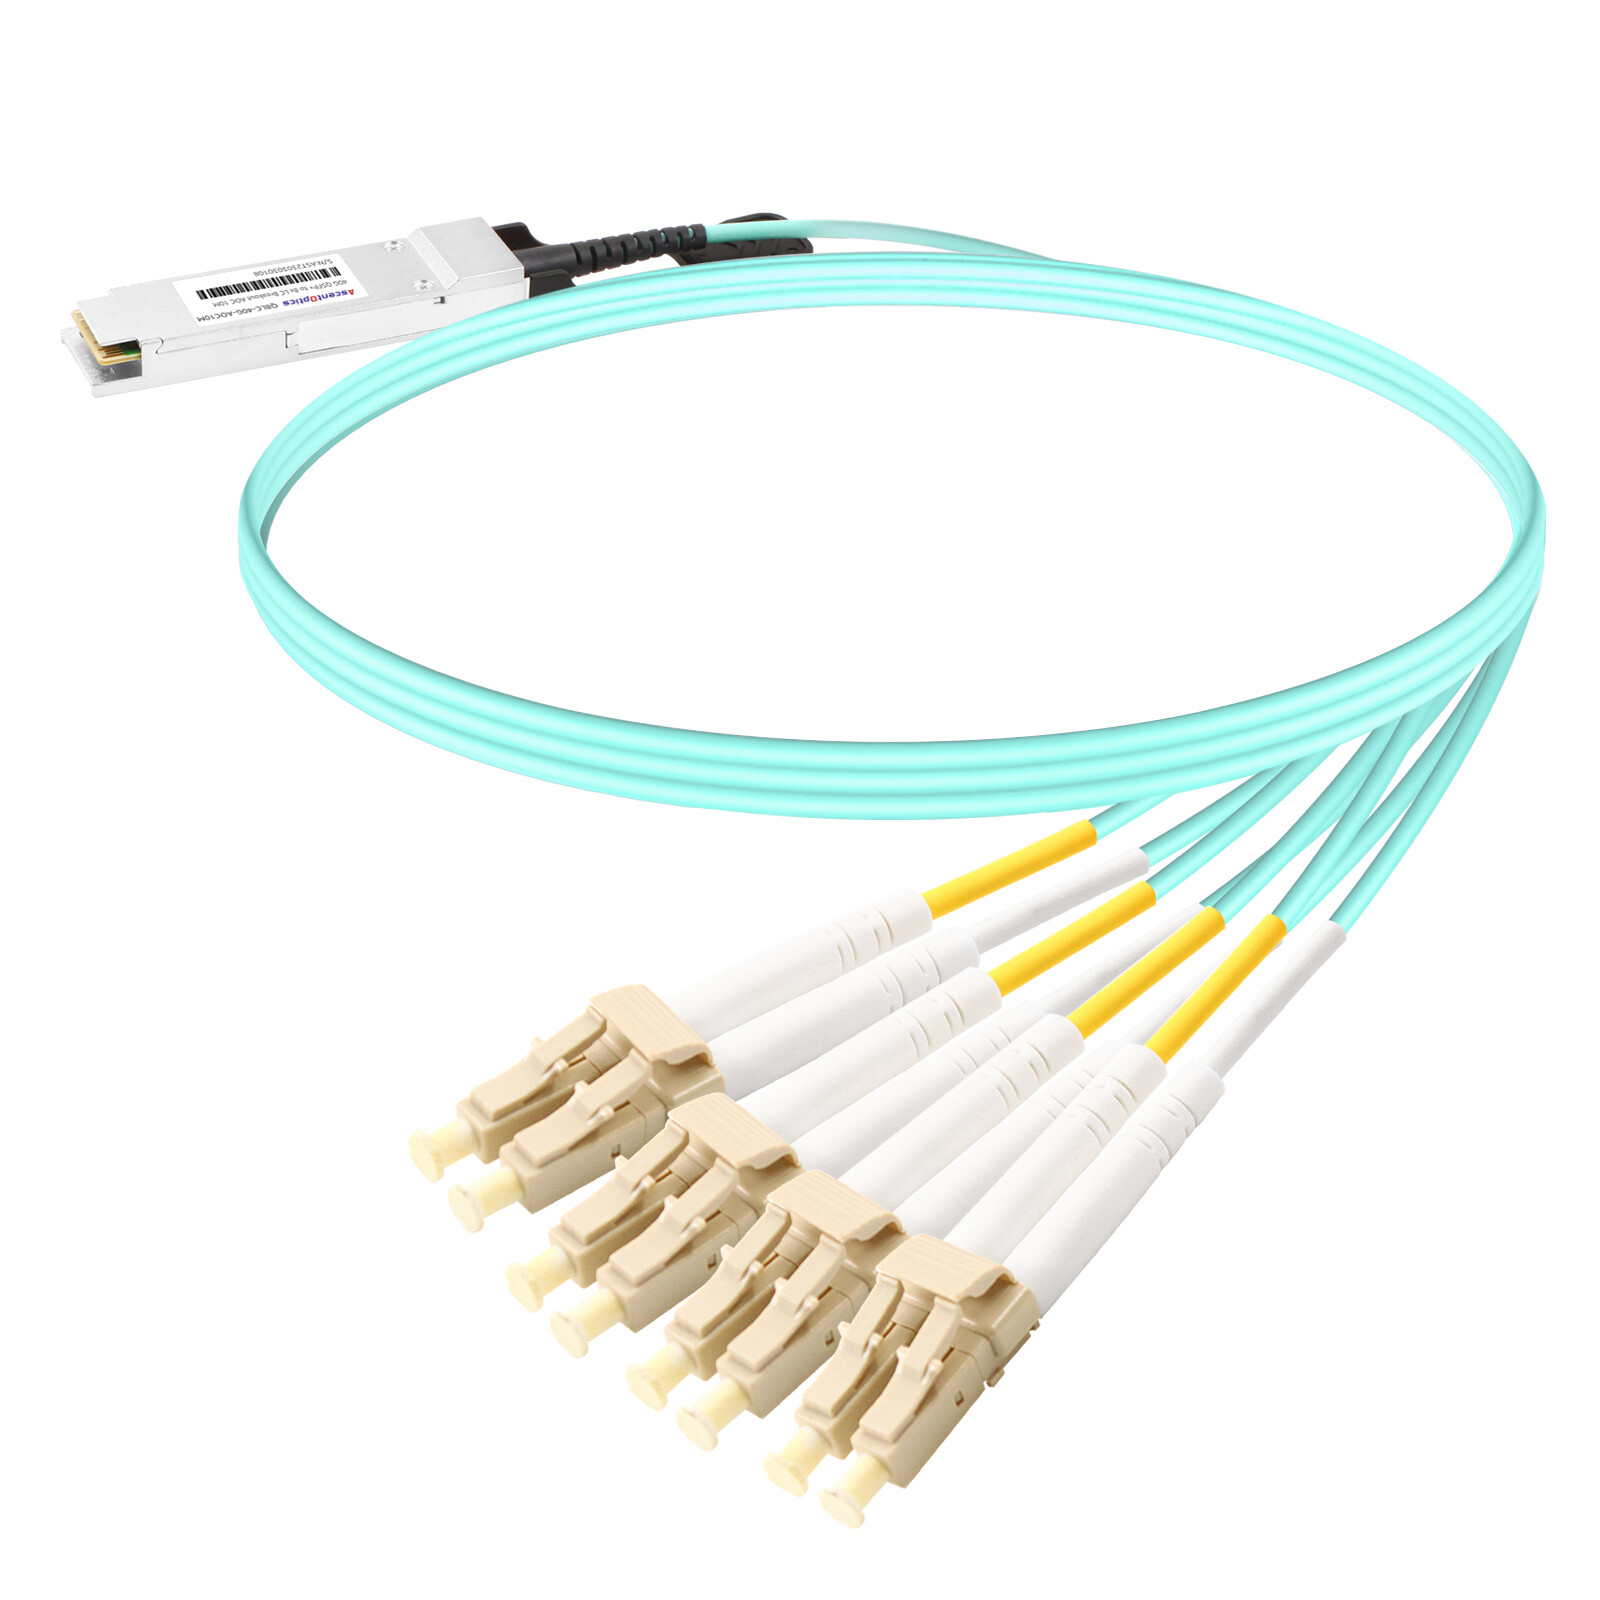 40G QSFP+ to 8x LC Breakout AOC Cable,10 Meters